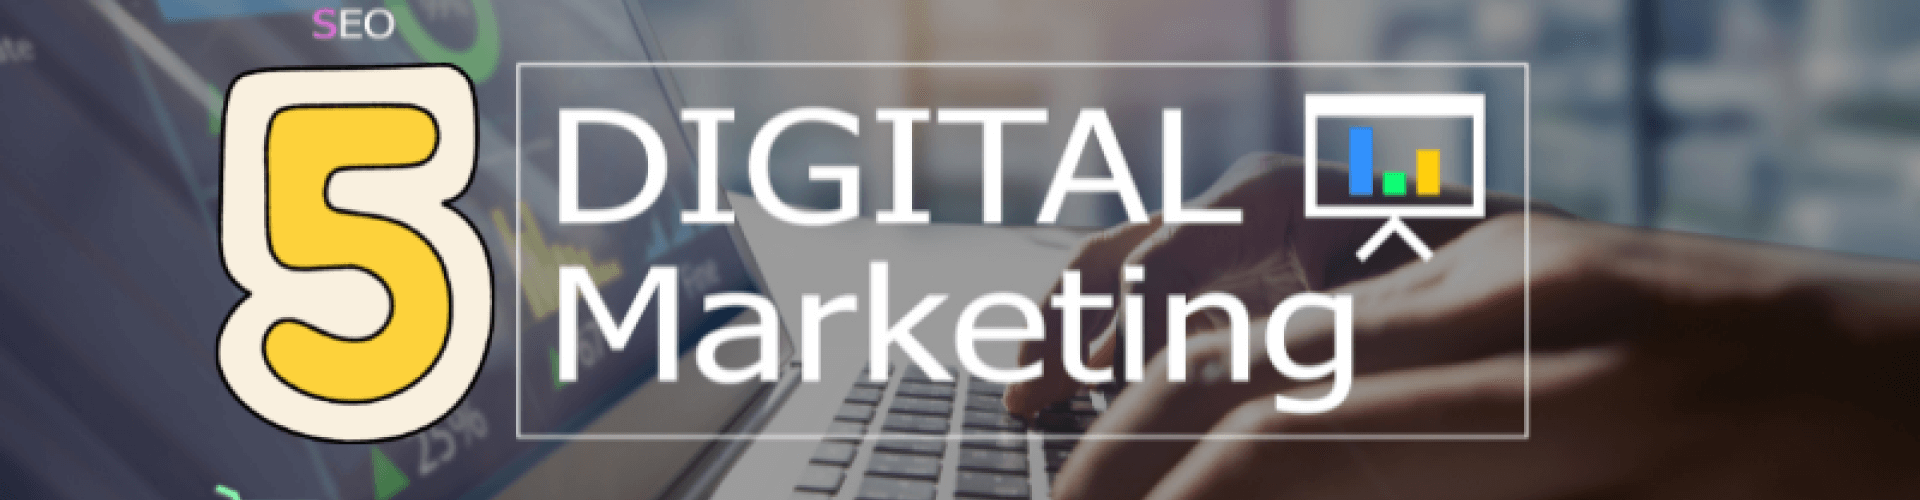 5 things to look for in digital marketing internship